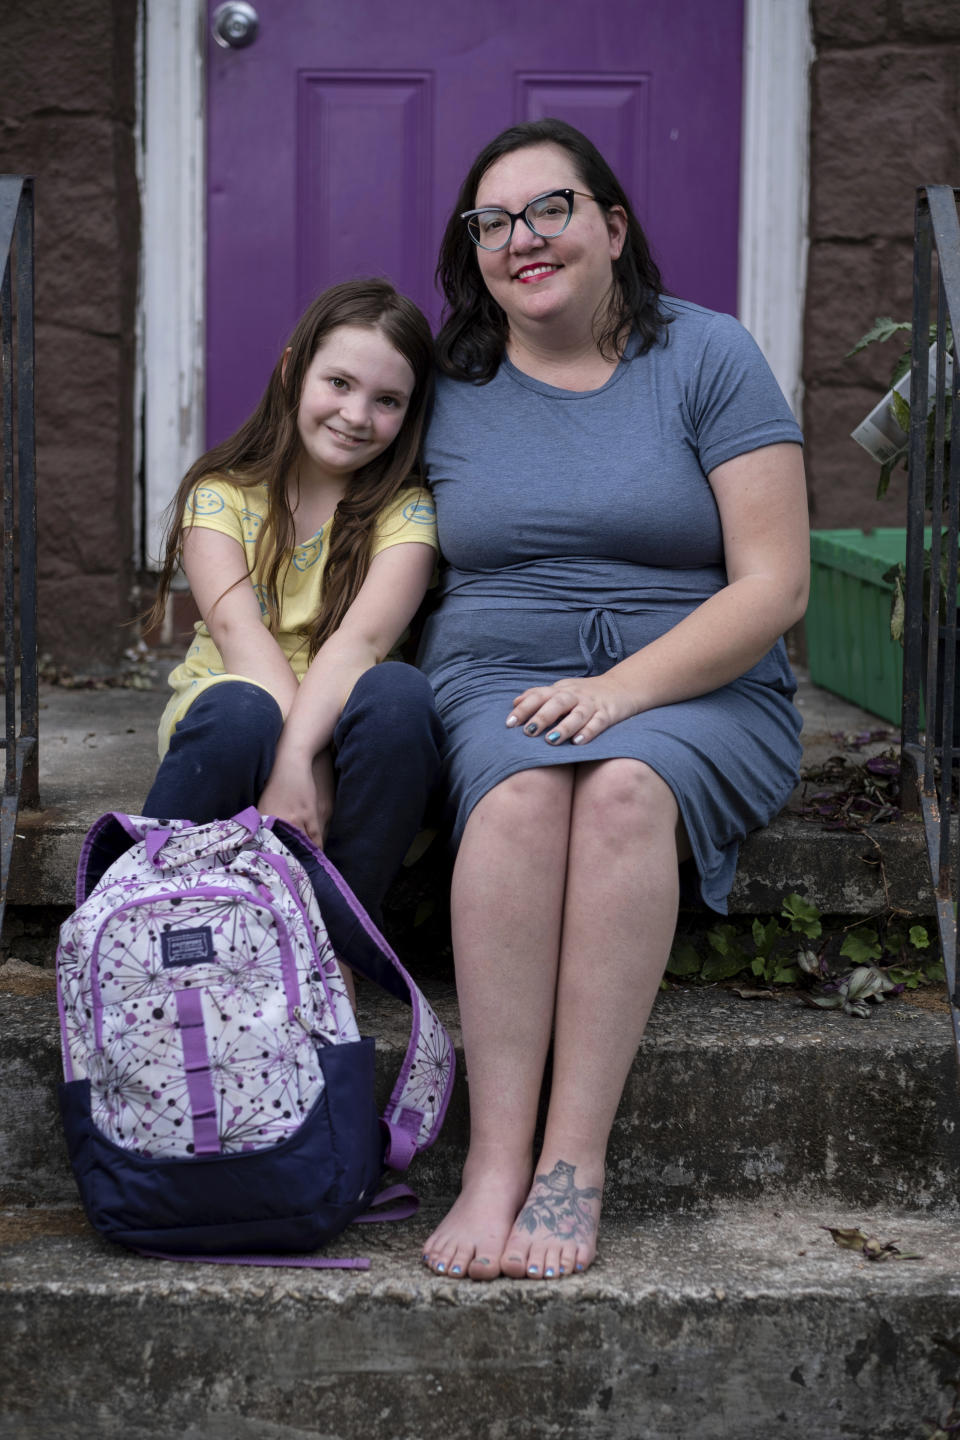 Abby Norman, right, said her 9-year-old daughter Priscilla Norman, left, was in tears the first morning of school testing because she felt pressure to do well, but didn't feel prepared after remote learning, sitting outside at the family's home in Decatur, Ga., Tuesday, May 18, 2021. (AP Photo/Ben Gray)